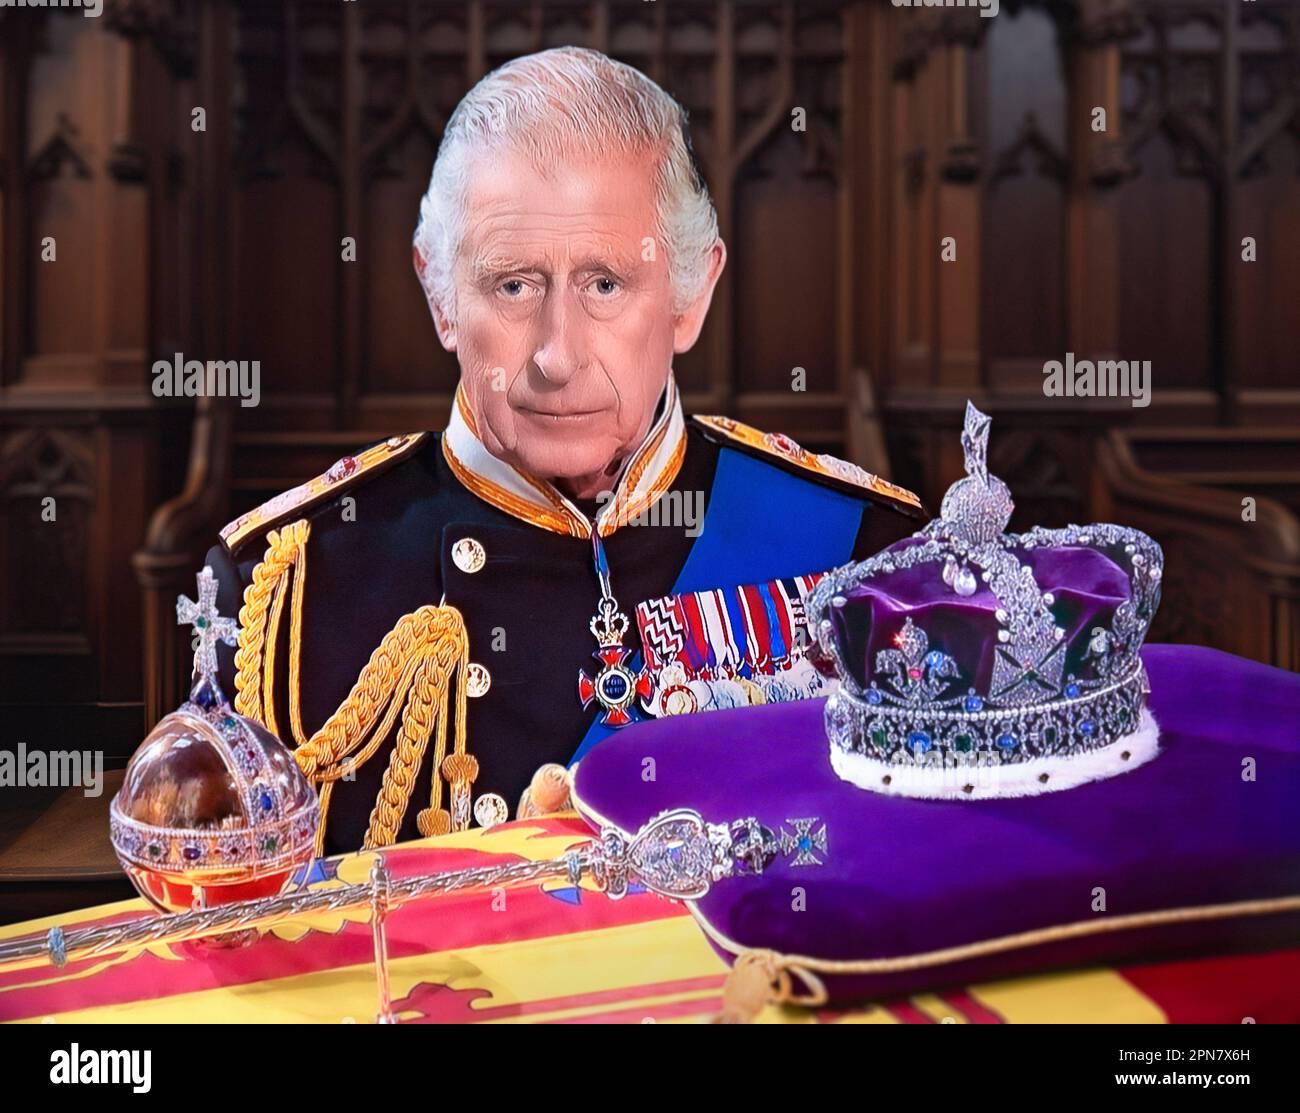 KING CHARLES III PORTRAIT UNIFORM 2022 CROWN JEWELS HEAD OF STATE CORONATION DESTINY. A pensive King Charles III at Queen Elizabeth II funeral service at St. George’s Chapel Windsor, with the Monarch’s Imperial State Crown, Sceptre and Orb on her Majesty’s coffin, the historic symbols of the British Sovereign on display during the funeral service.  19/09/2022  St. Georges Chapel Windsor Berkshire UK. Conceptual harmonious  background with digital image merge Stock Photo